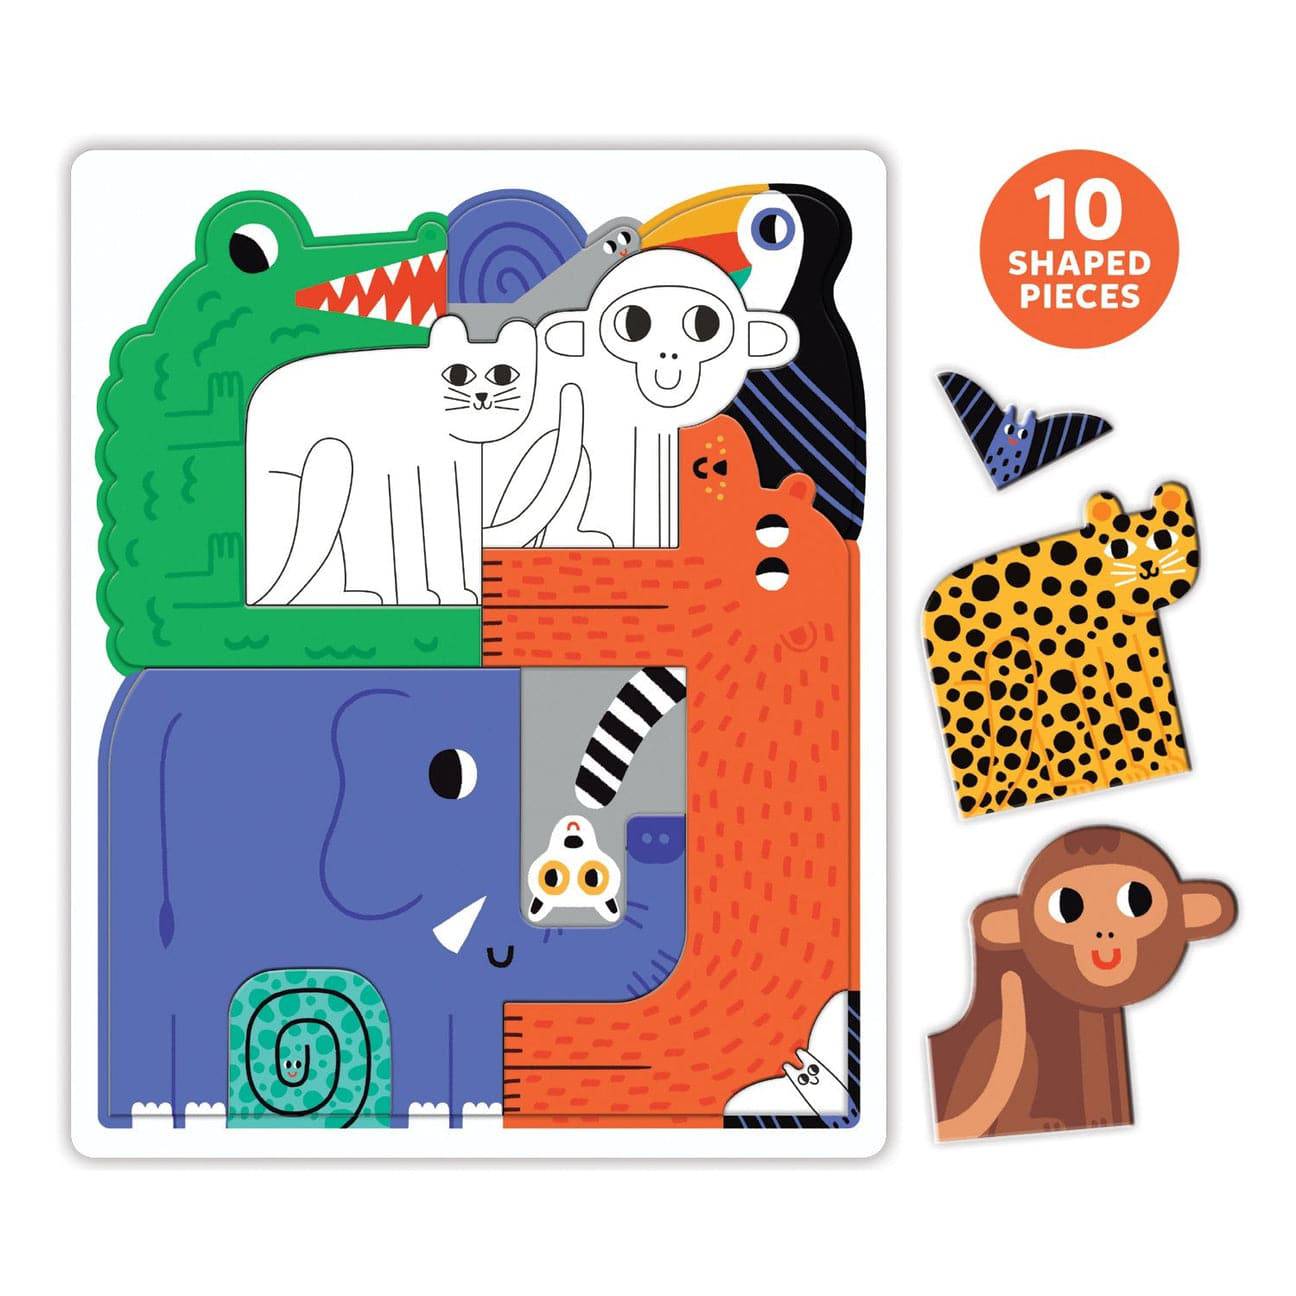 Jungle We Go Together Puzzle - Twinkle Twinkle Little One